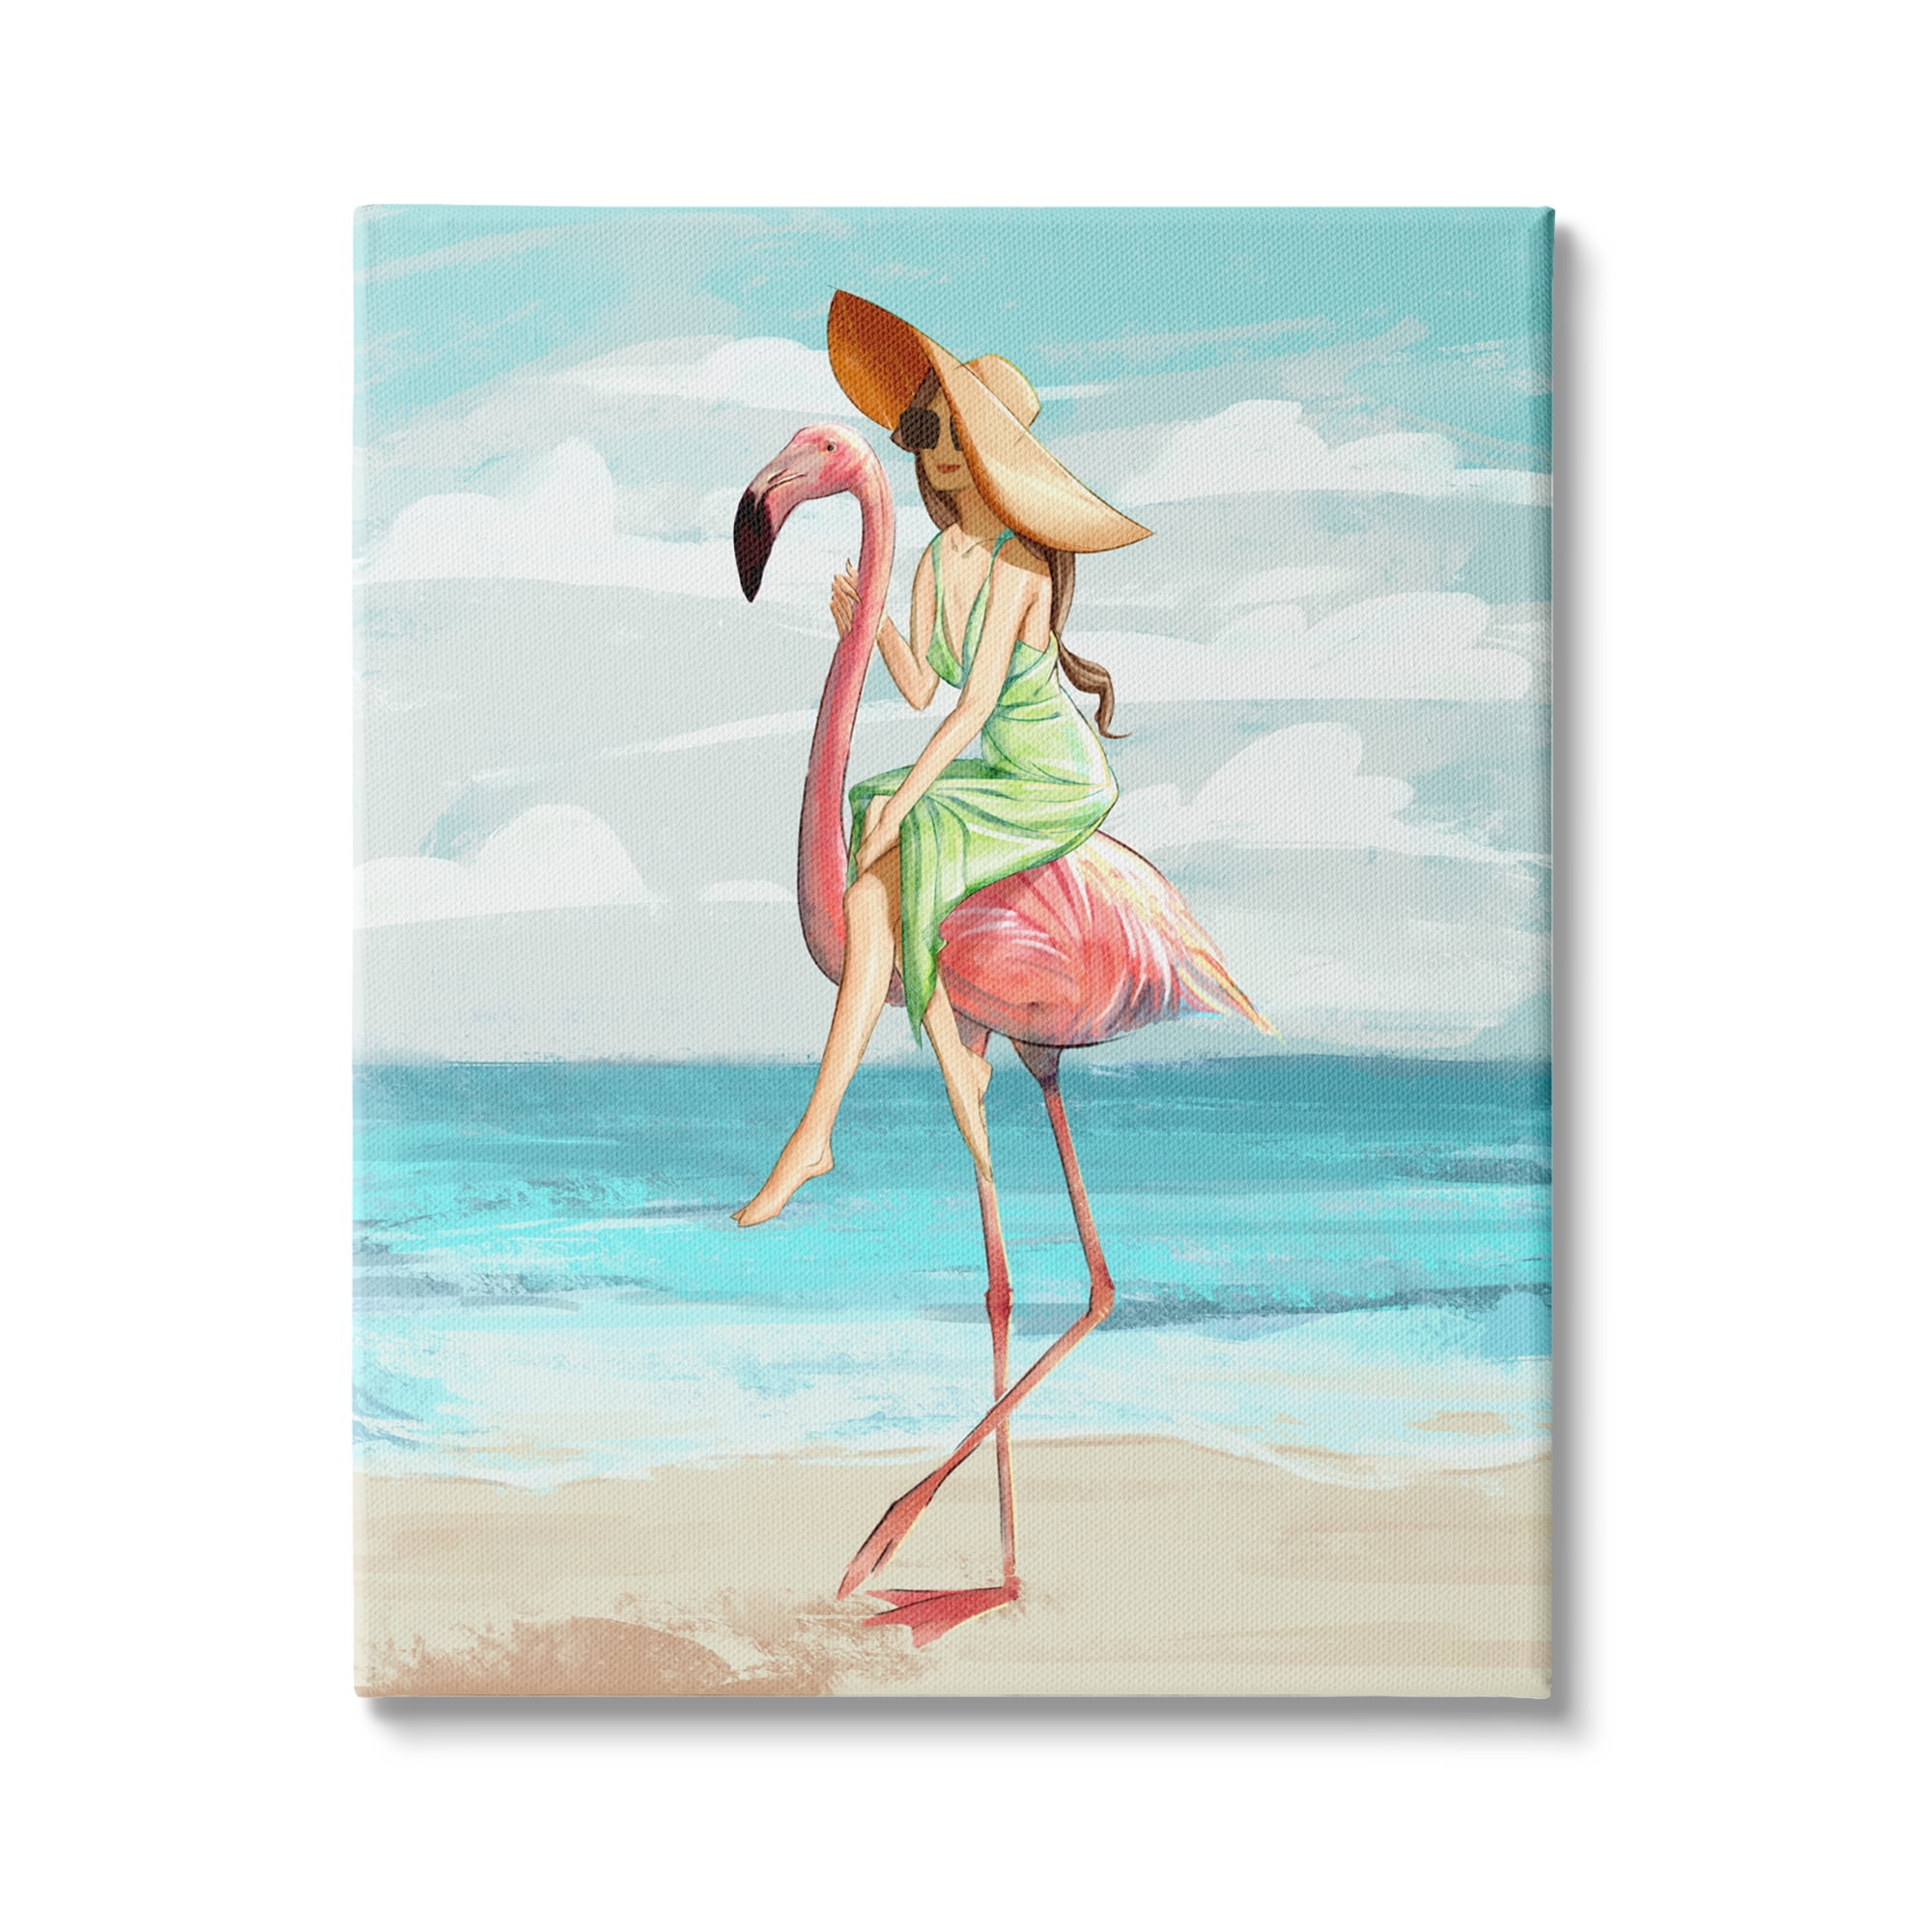 Flamingo Stand Tall Darling ~ Custom Summer 2020 Color Changing